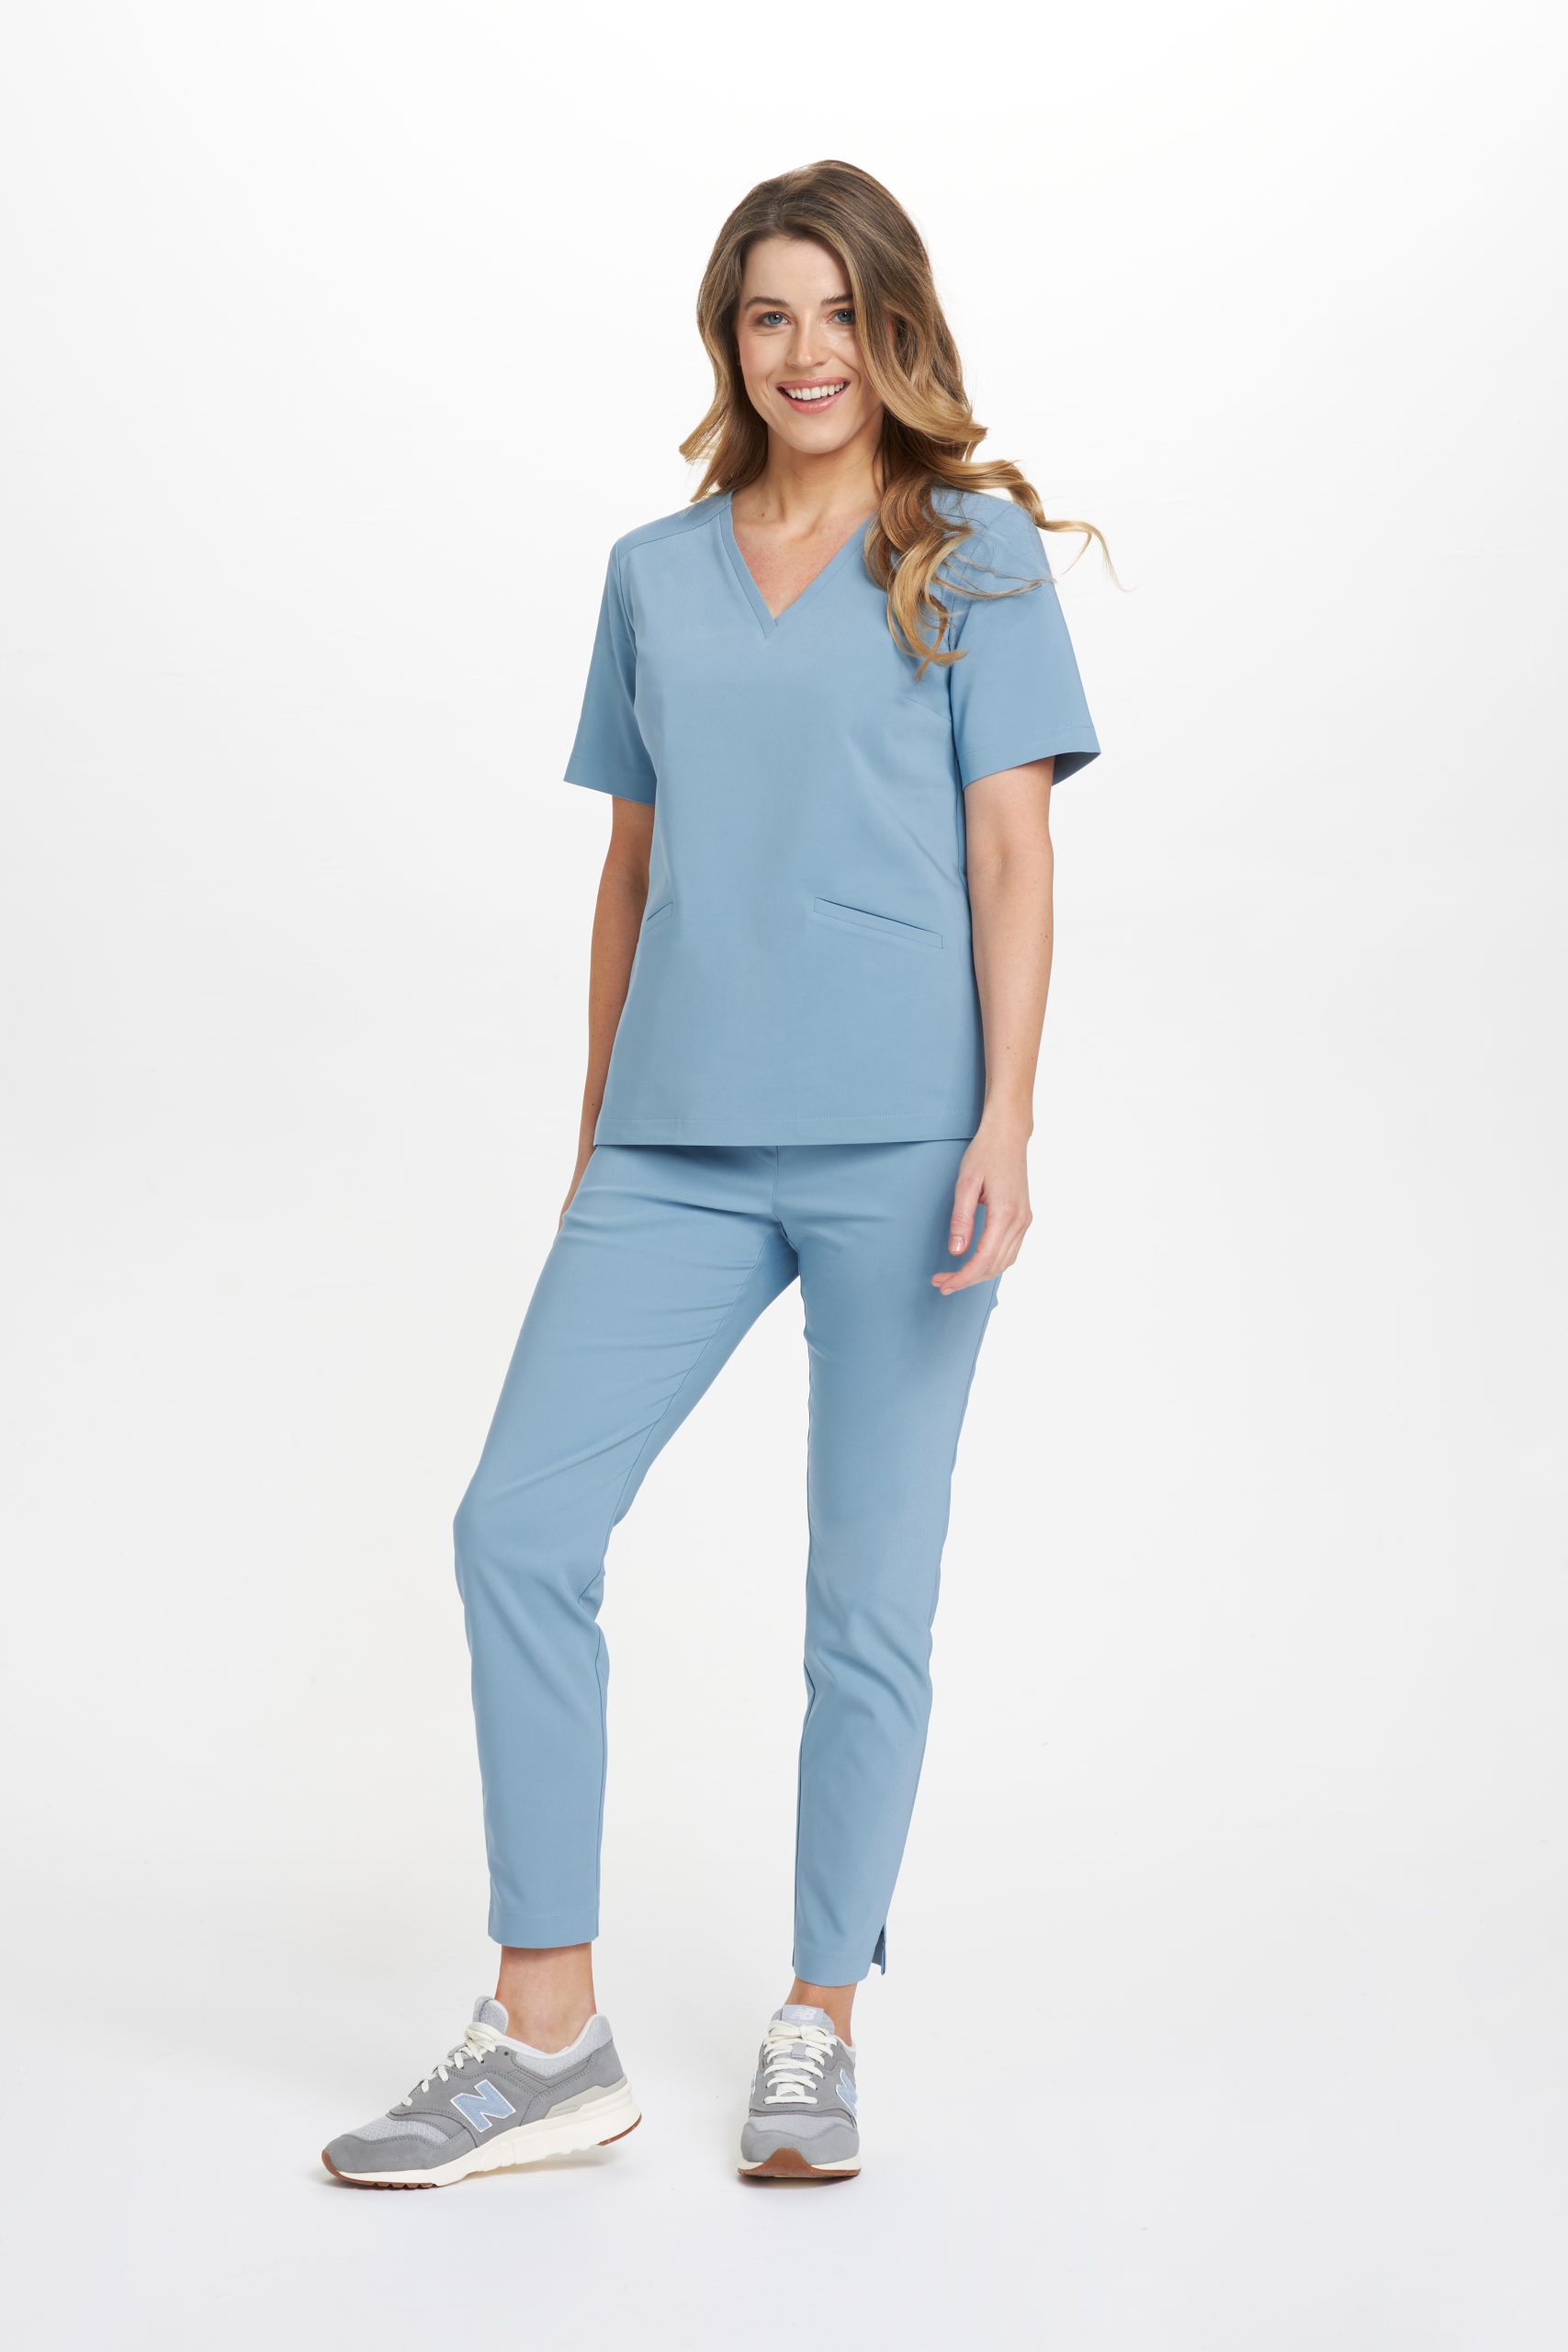 Women's medical straight pants SCRUBS in Blue from BASIC collection